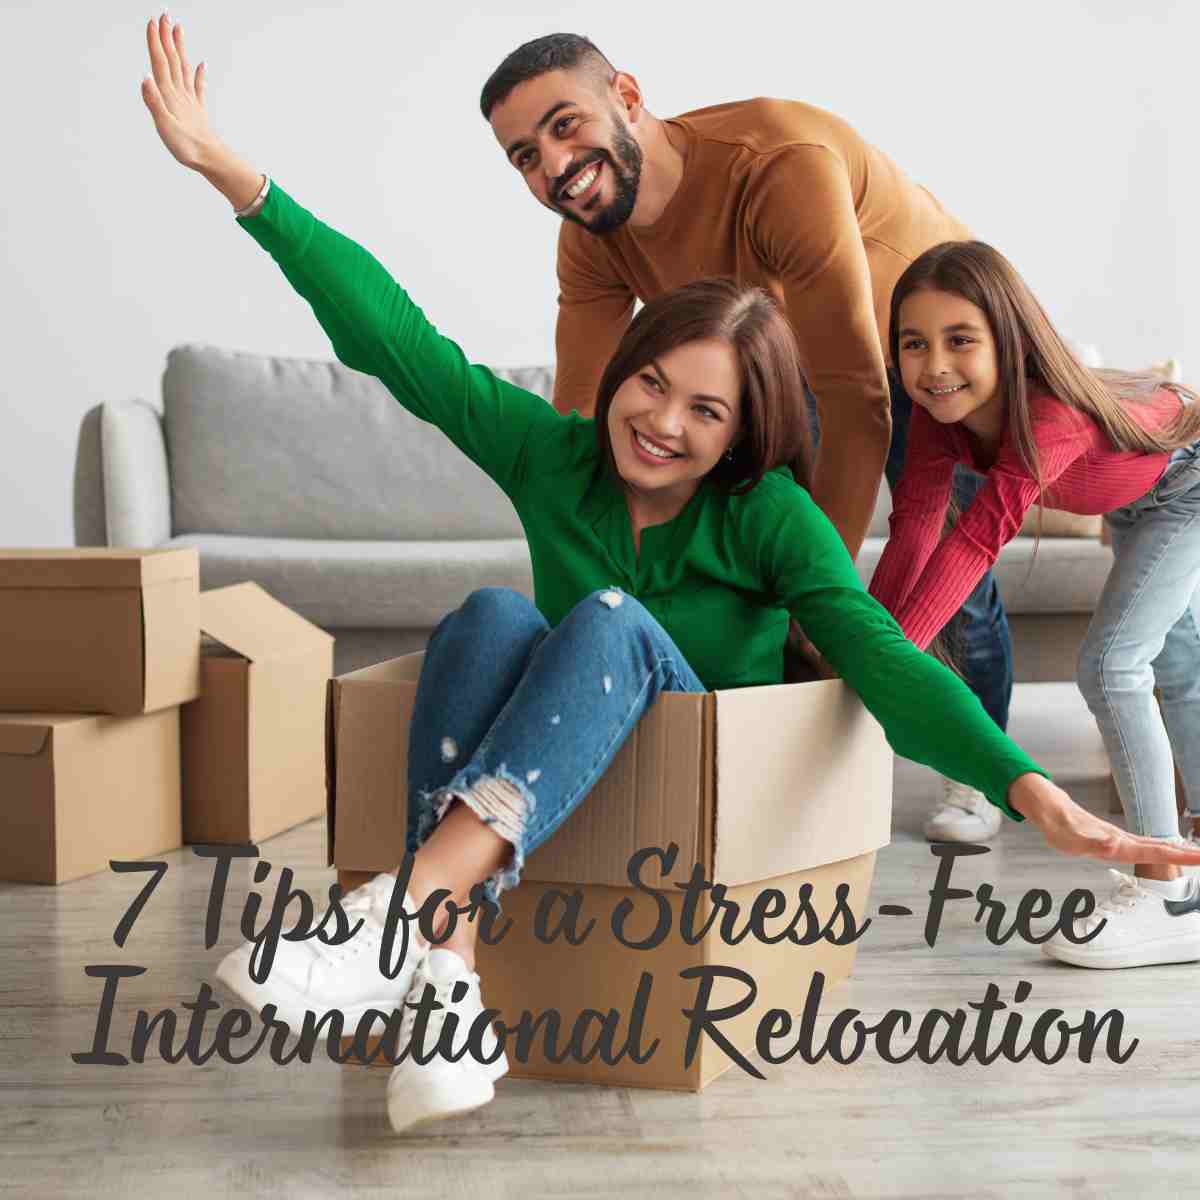 7 Tips for a Stress-Free International Relocation